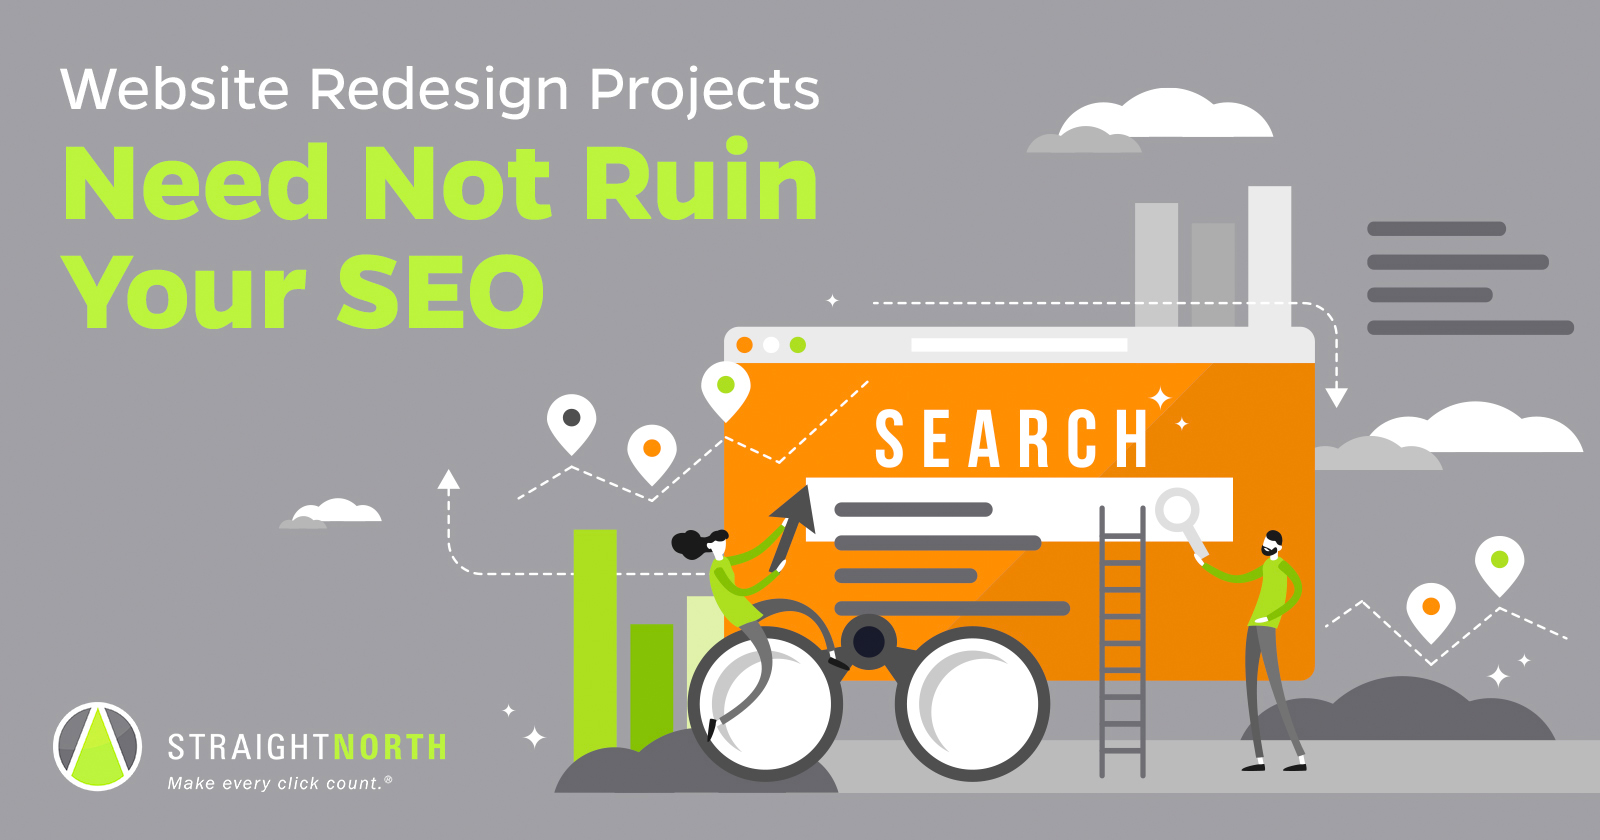 Don’t Let Website Redesign Projects Ruin Your SEO